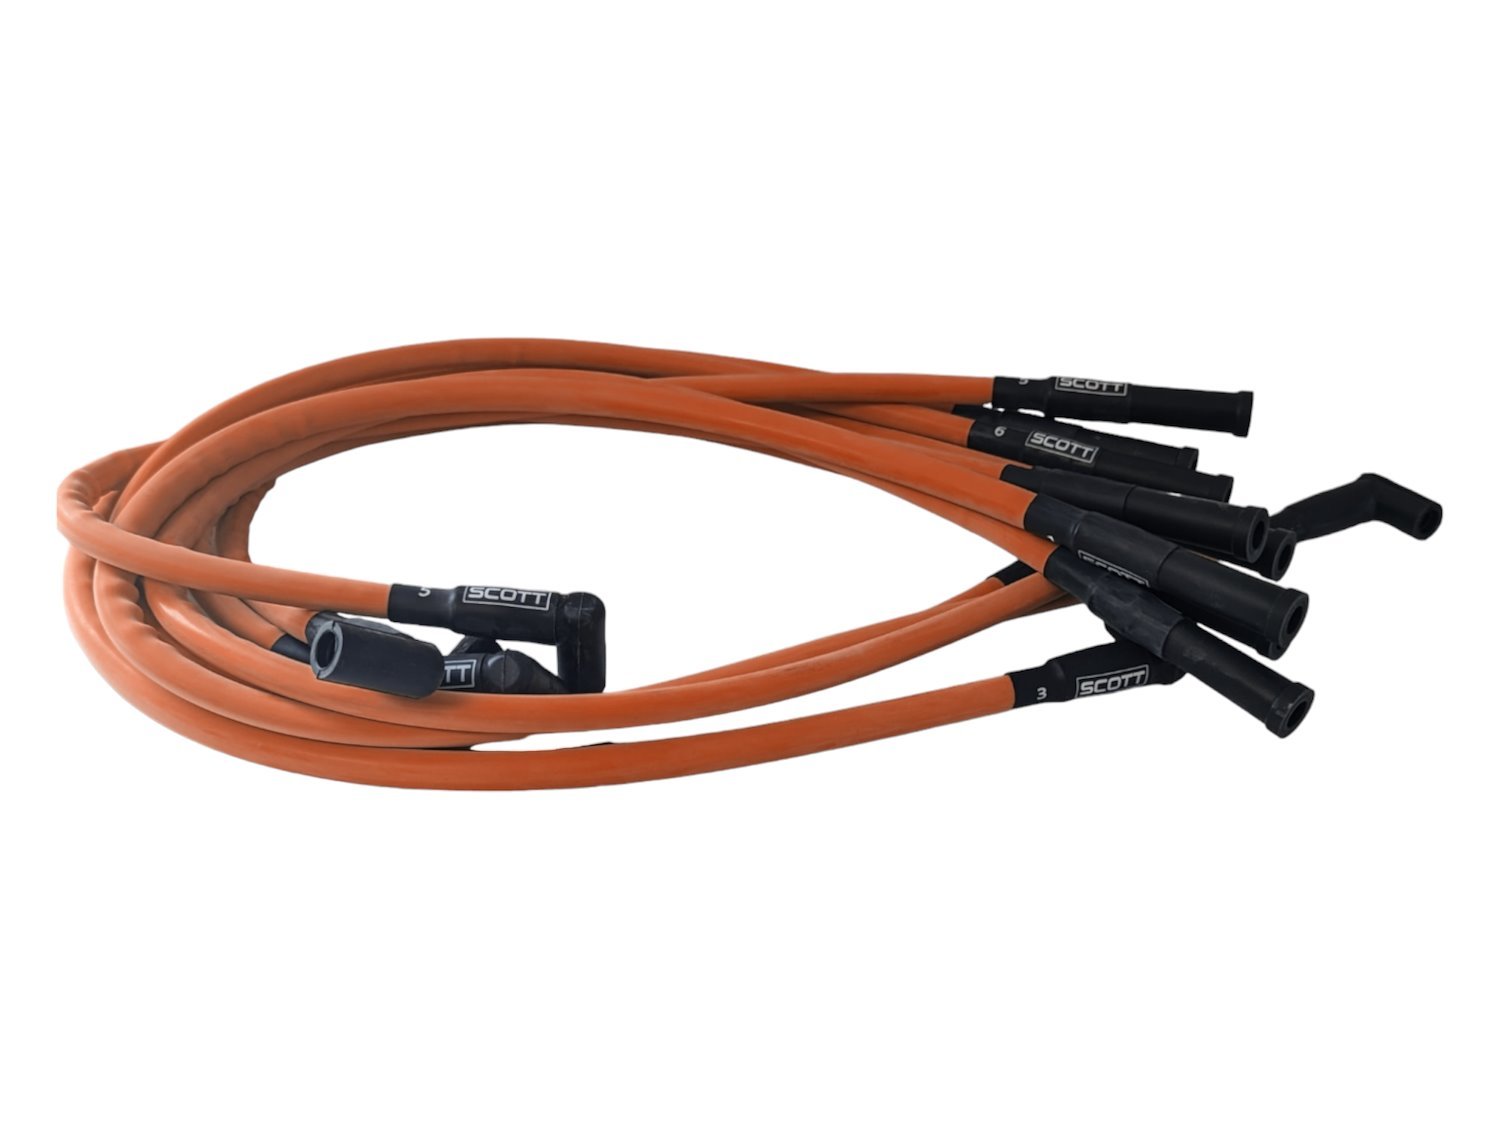 SPW-CH-660-9 High-Performance Silicone-Sleeved Spark Plug Wire Set for Small Block Dodge, Over Valve Cover [Fluorescent Orange]